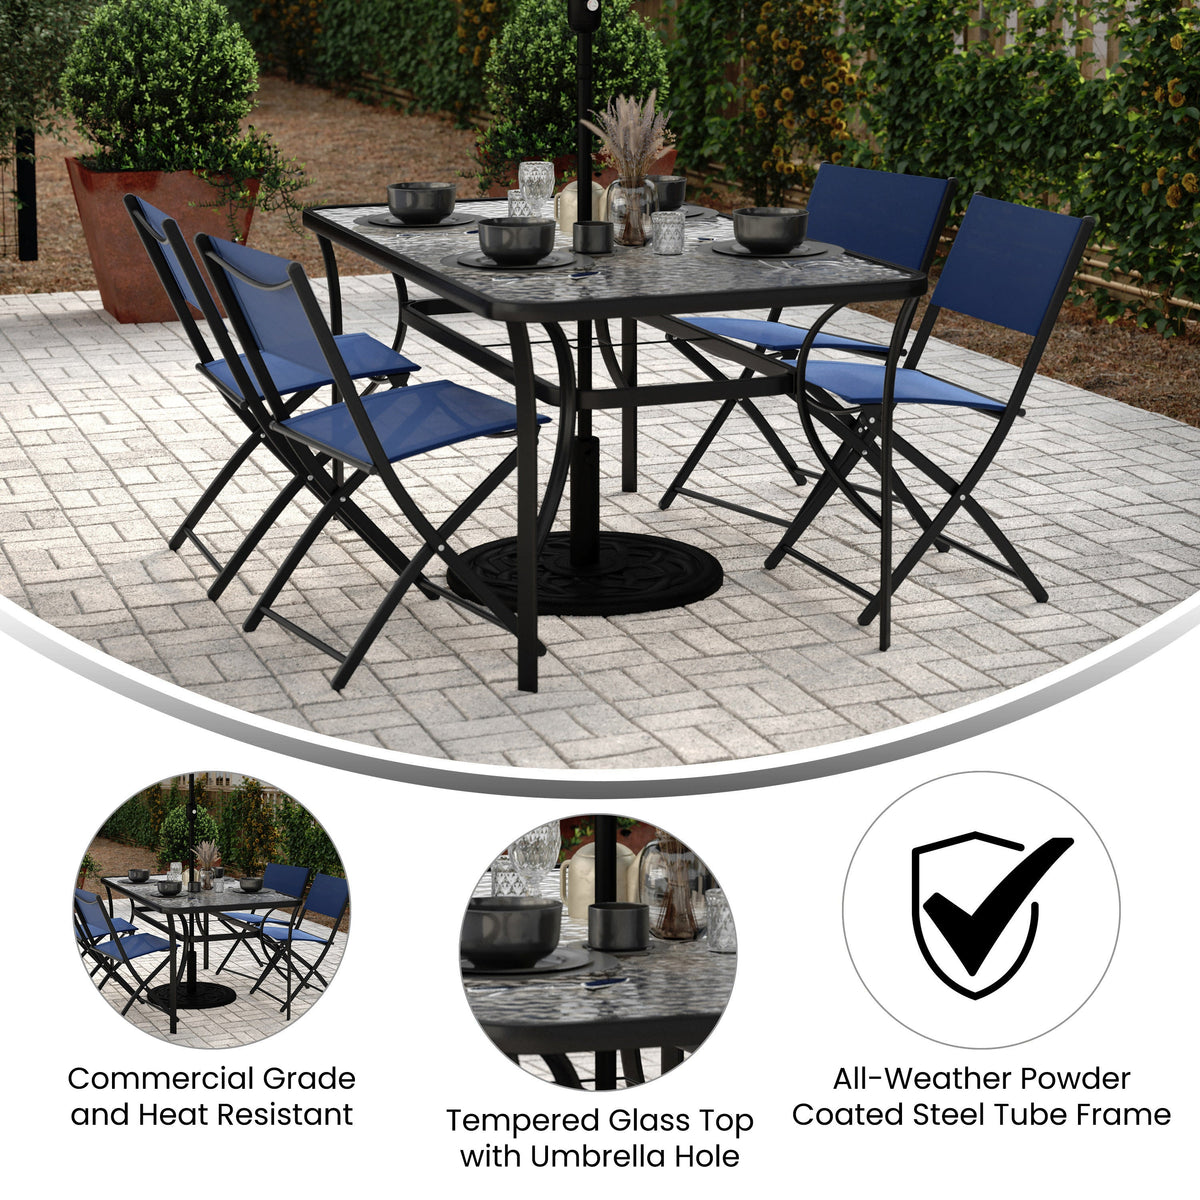 Clear Top/Black Frame |#| Commercial 35x59 Tempered Glass and Steel Patio Table with Umbrella Hole-Black